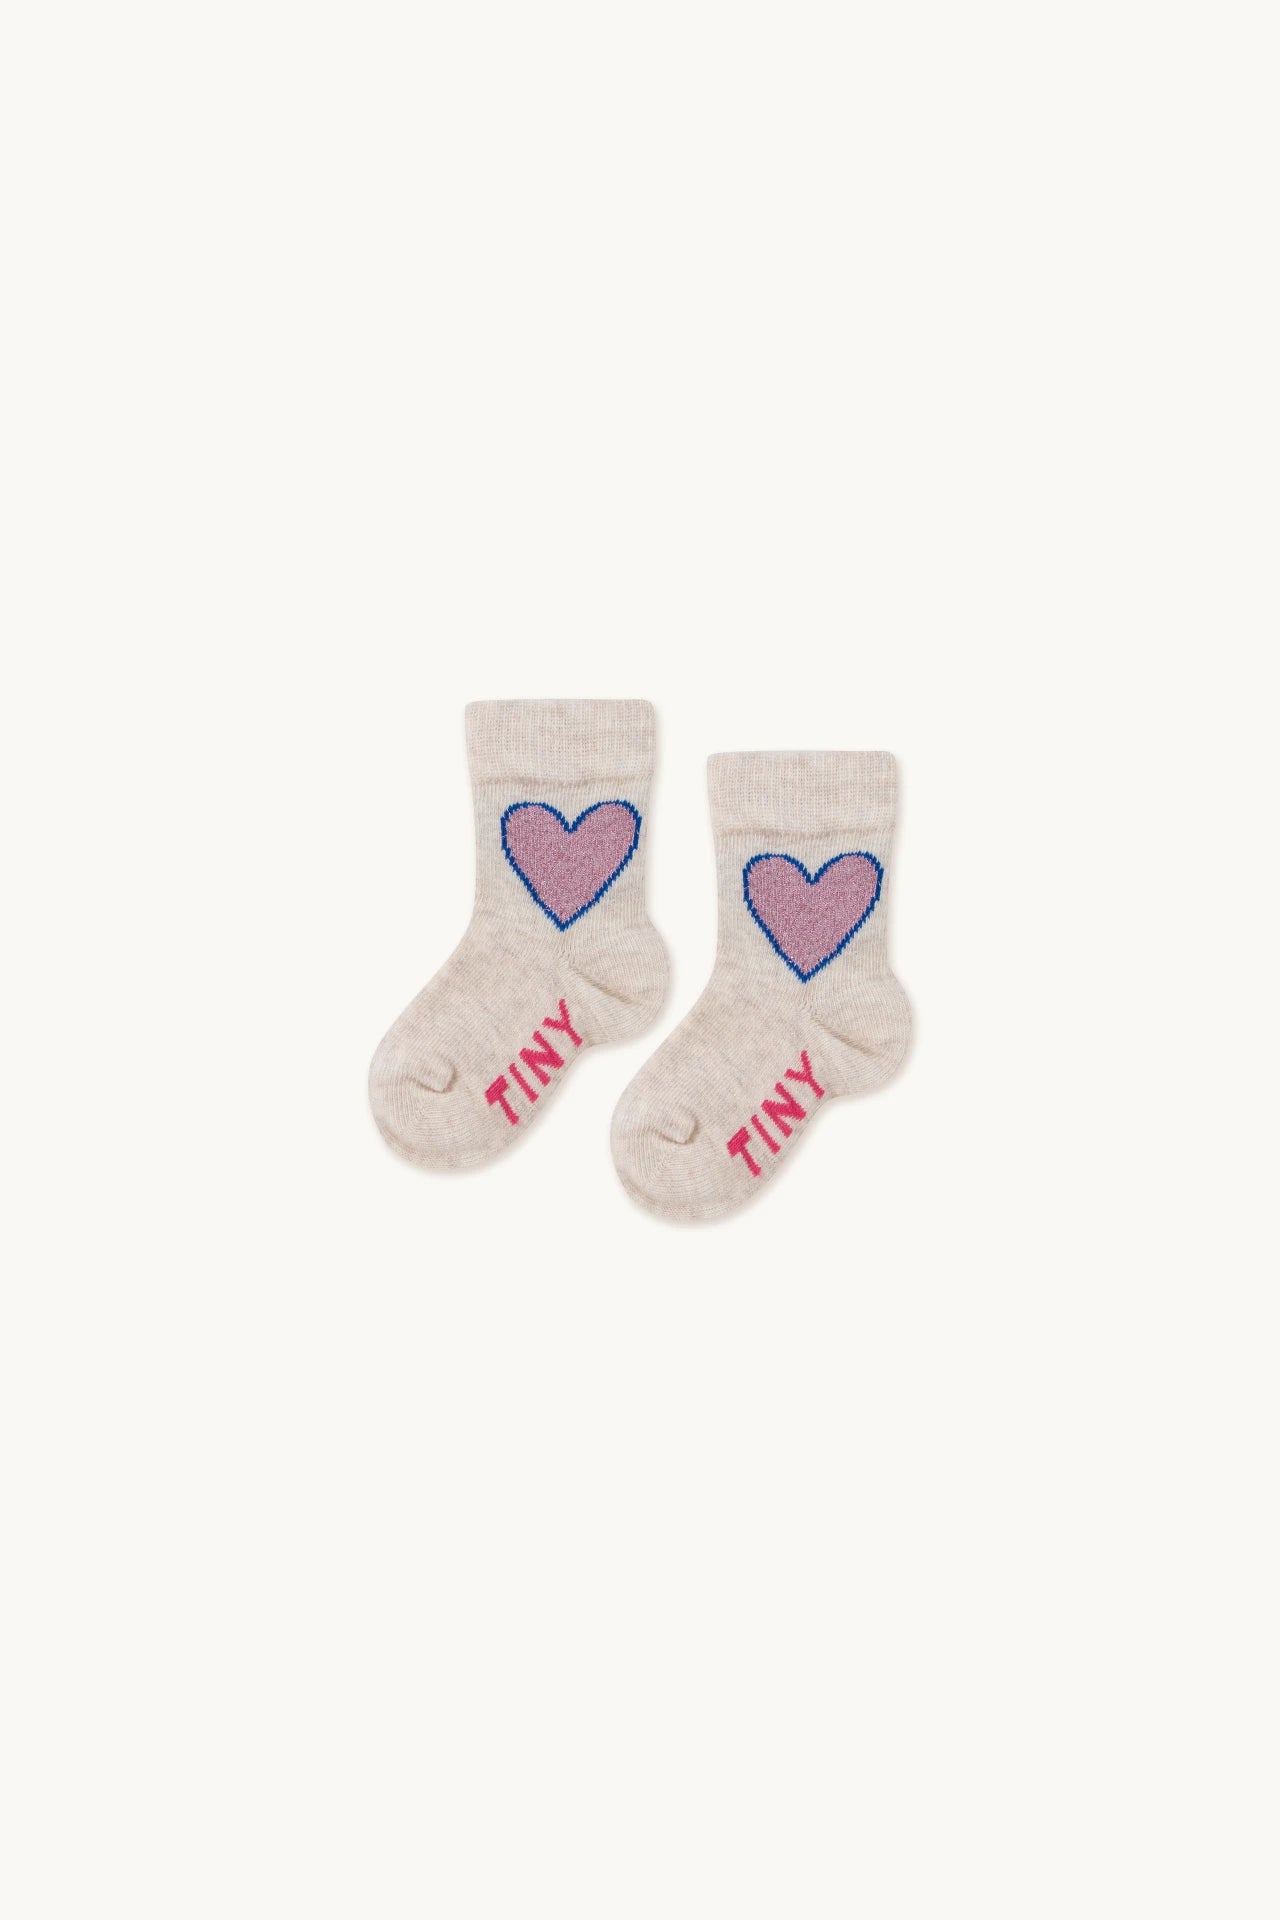 Tiny Cottons - Chaussettes Coeurs